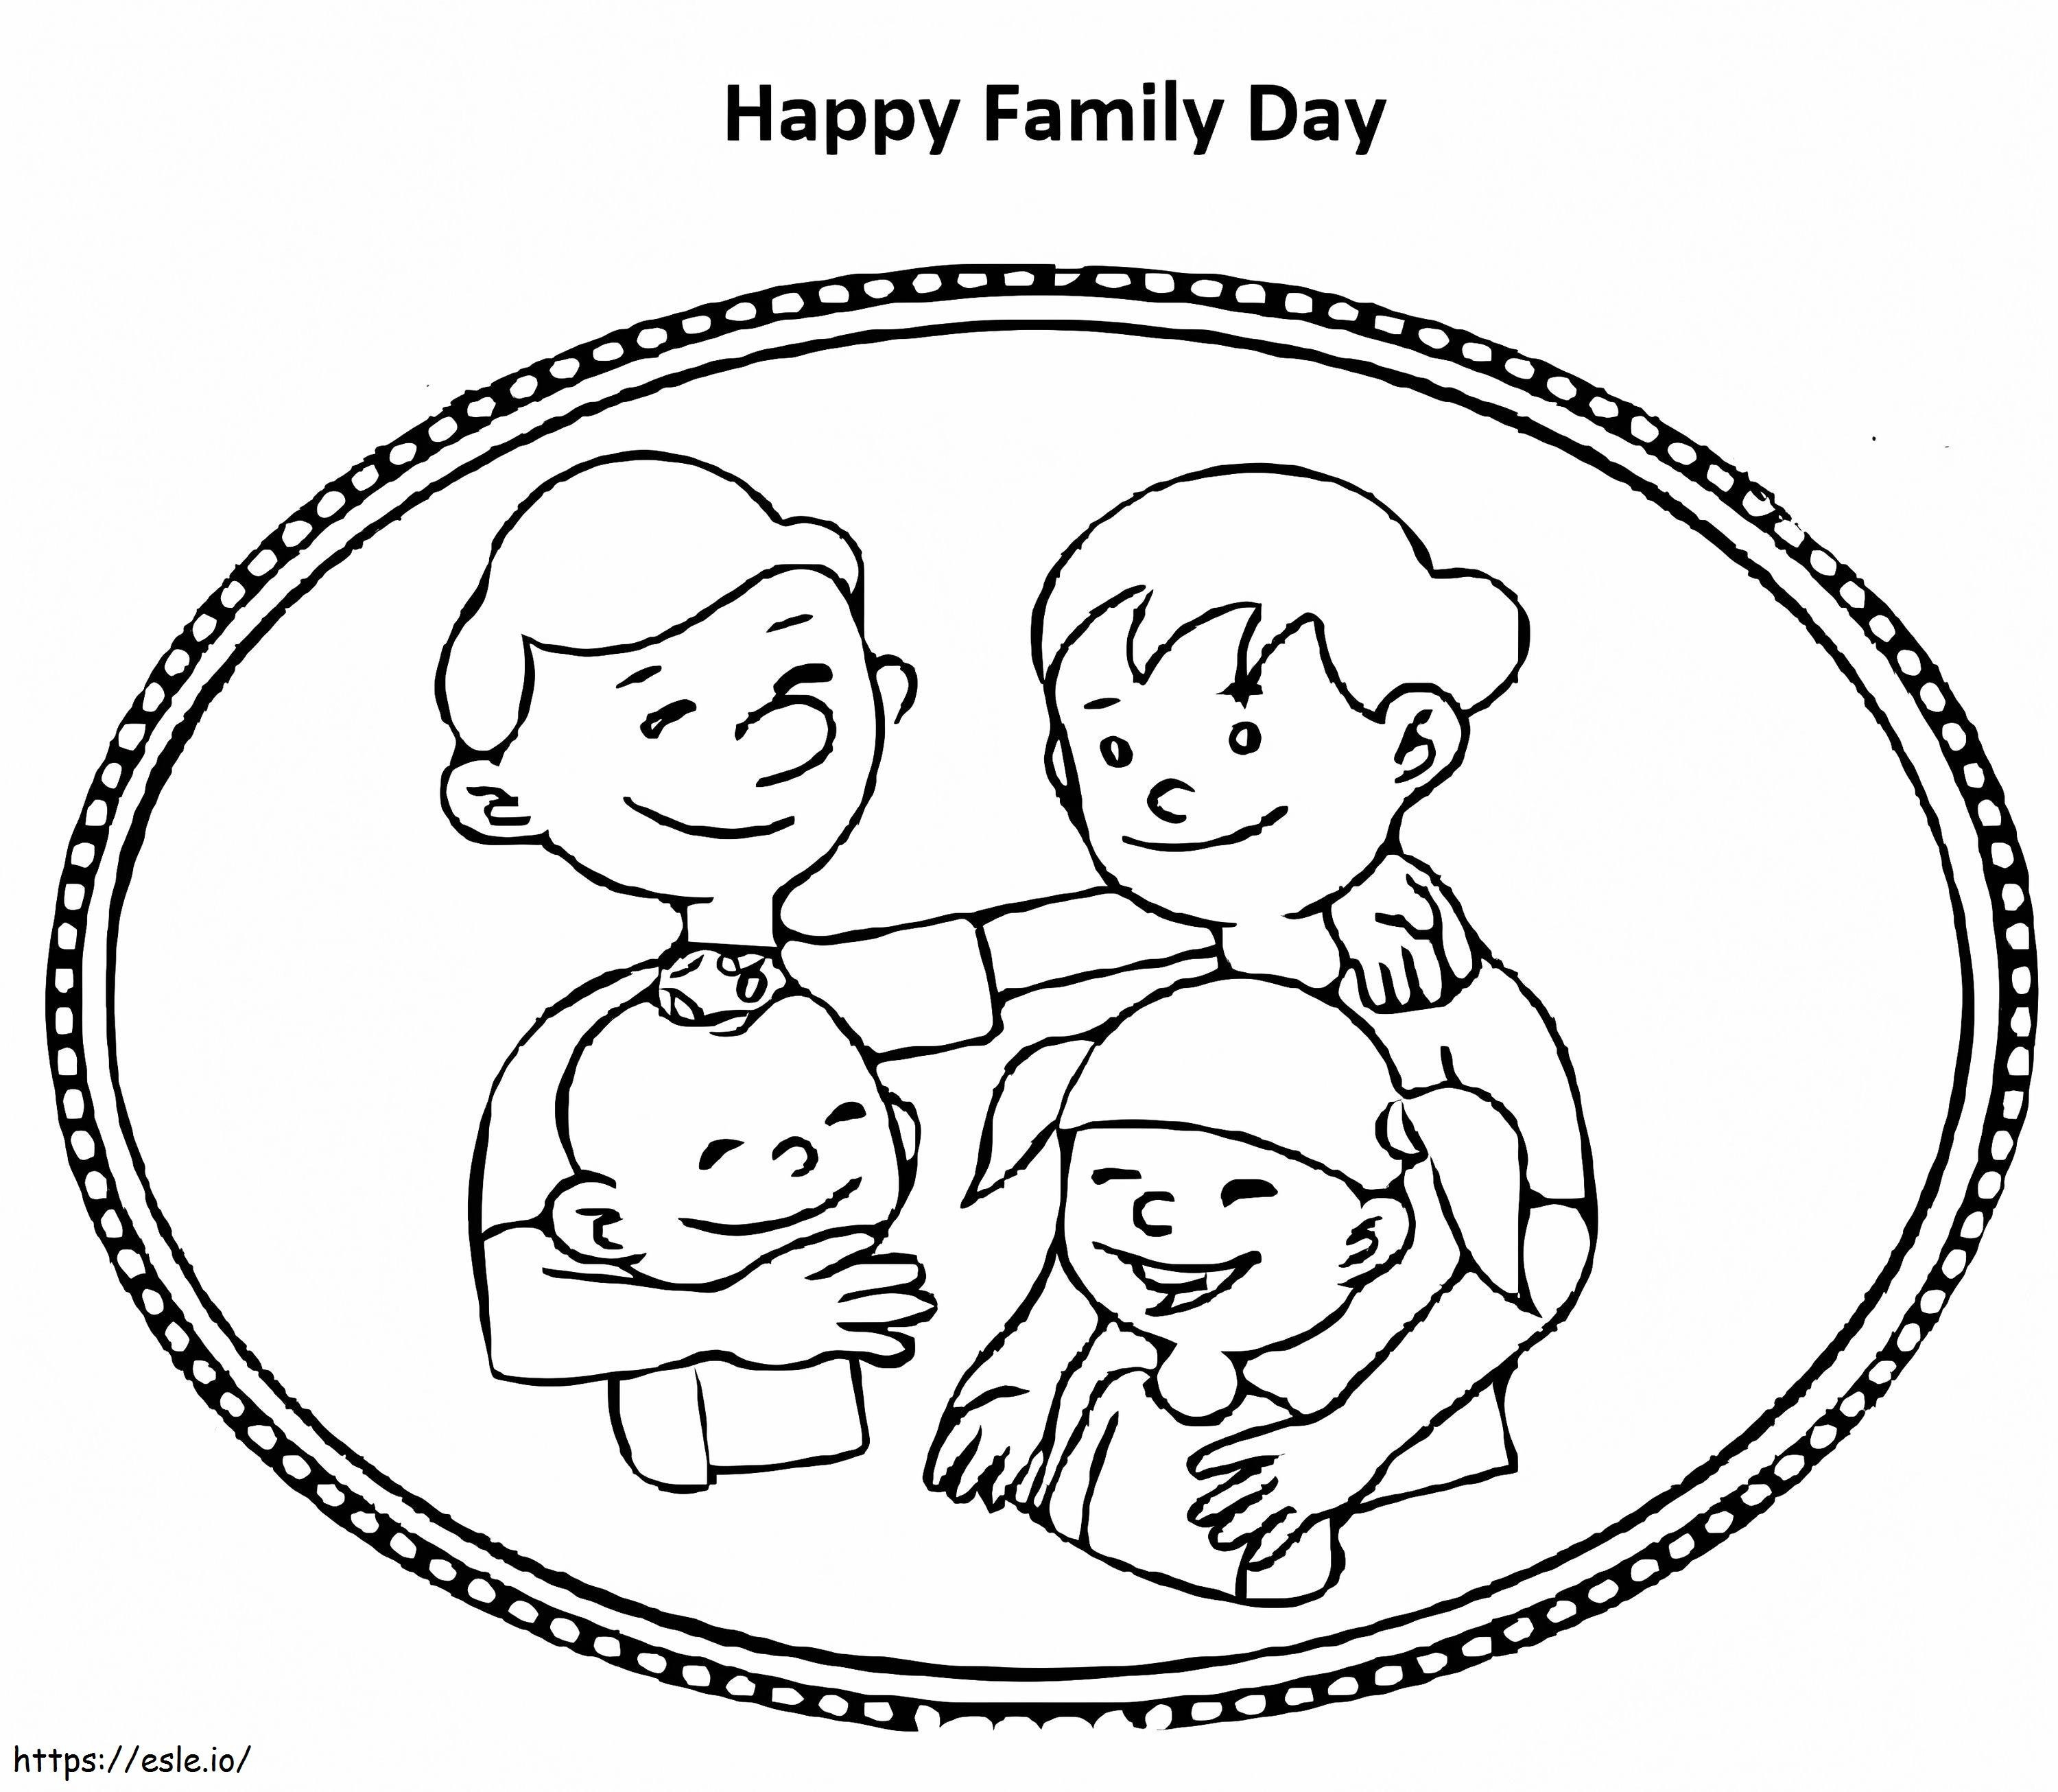 Print Happy Family Day coloring page